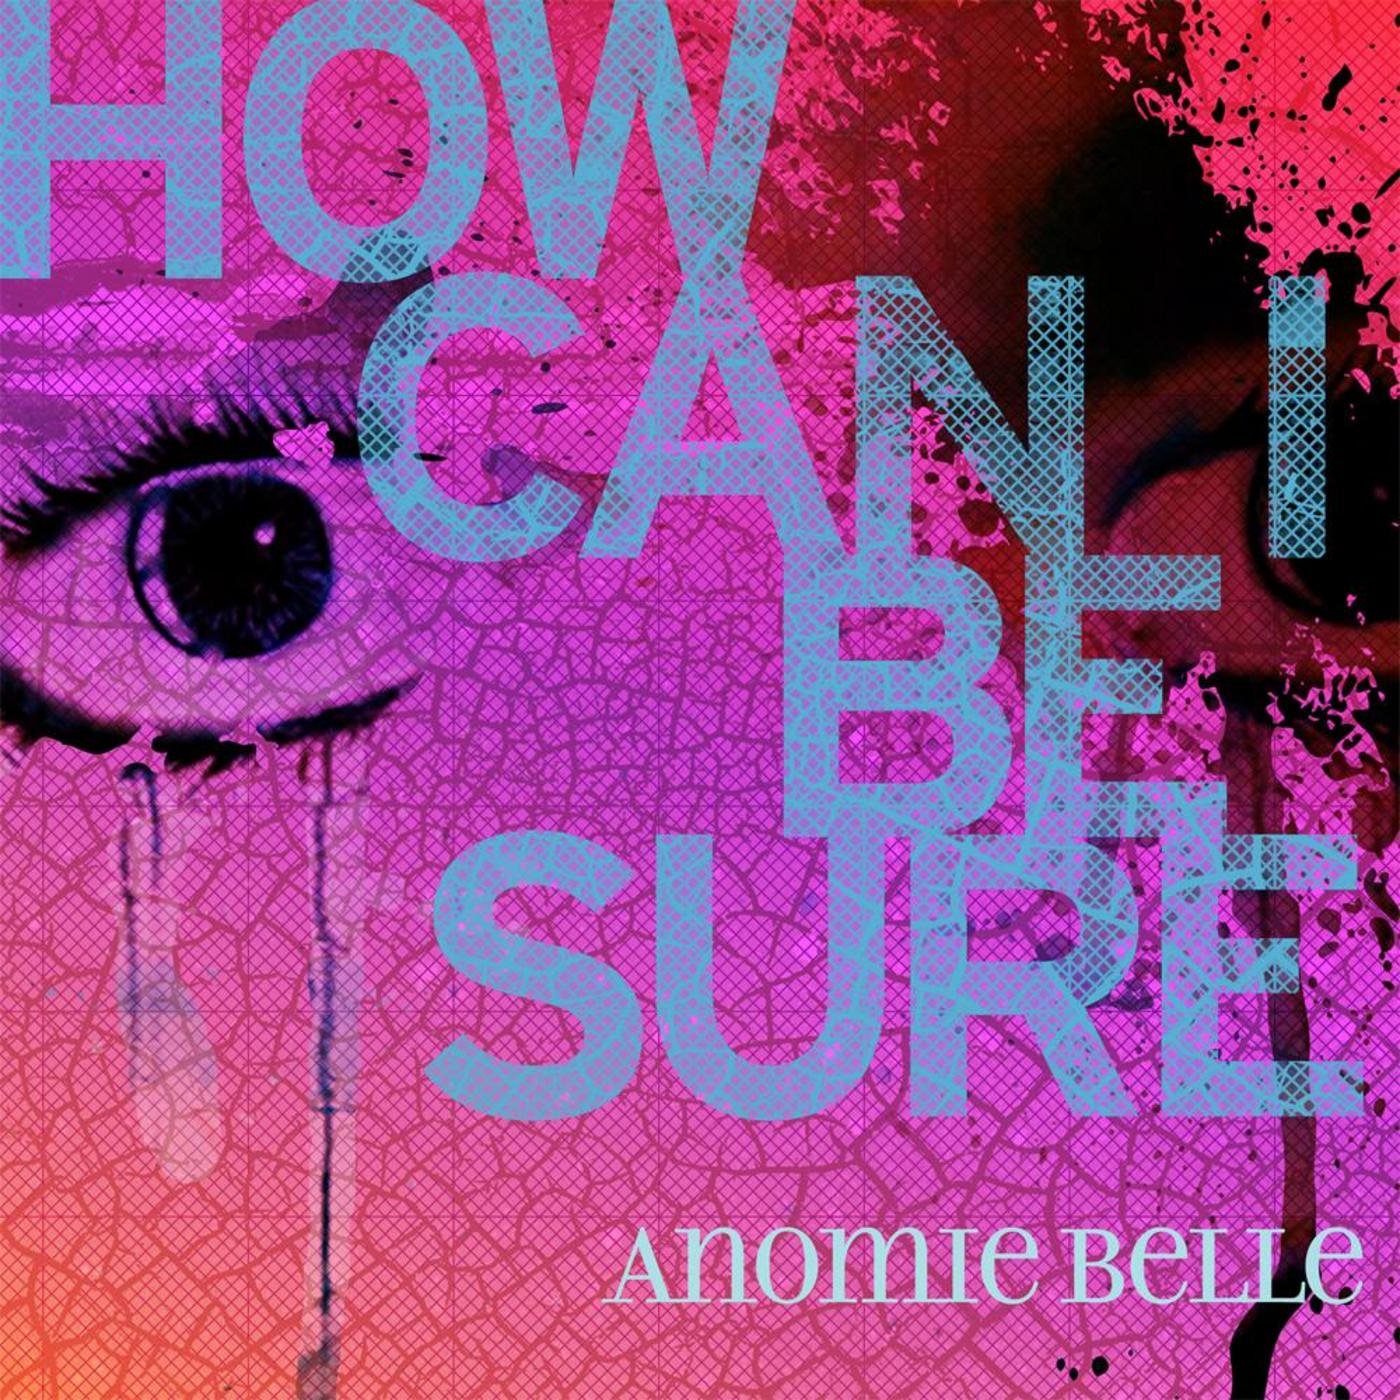 Anomie Belle《How Can I Be Sure》[FLAC/MP3-320K]